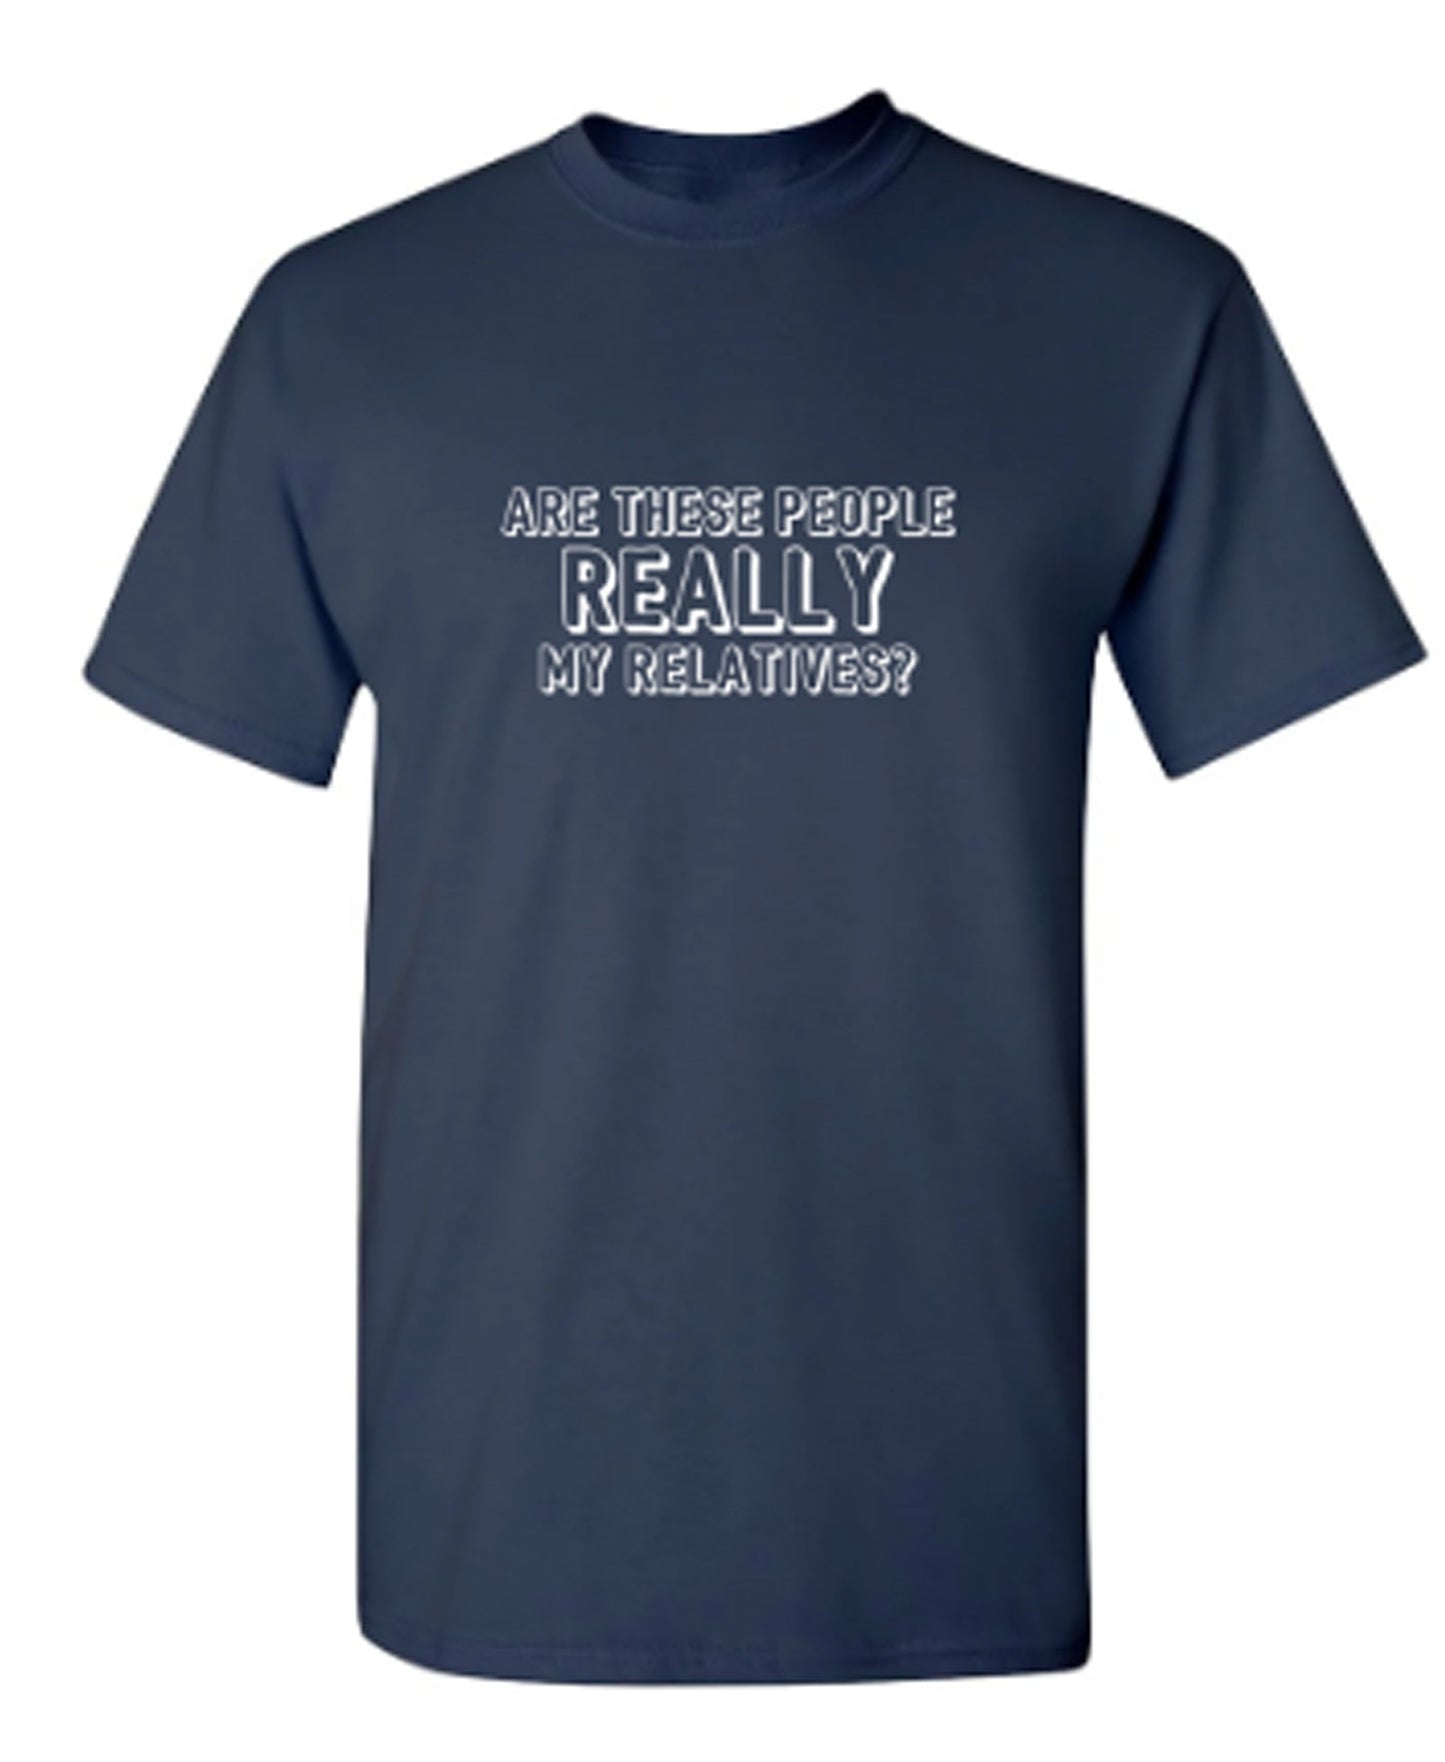 Are These People Really My Relatives? - Funny T Shirts & Graphic Tees